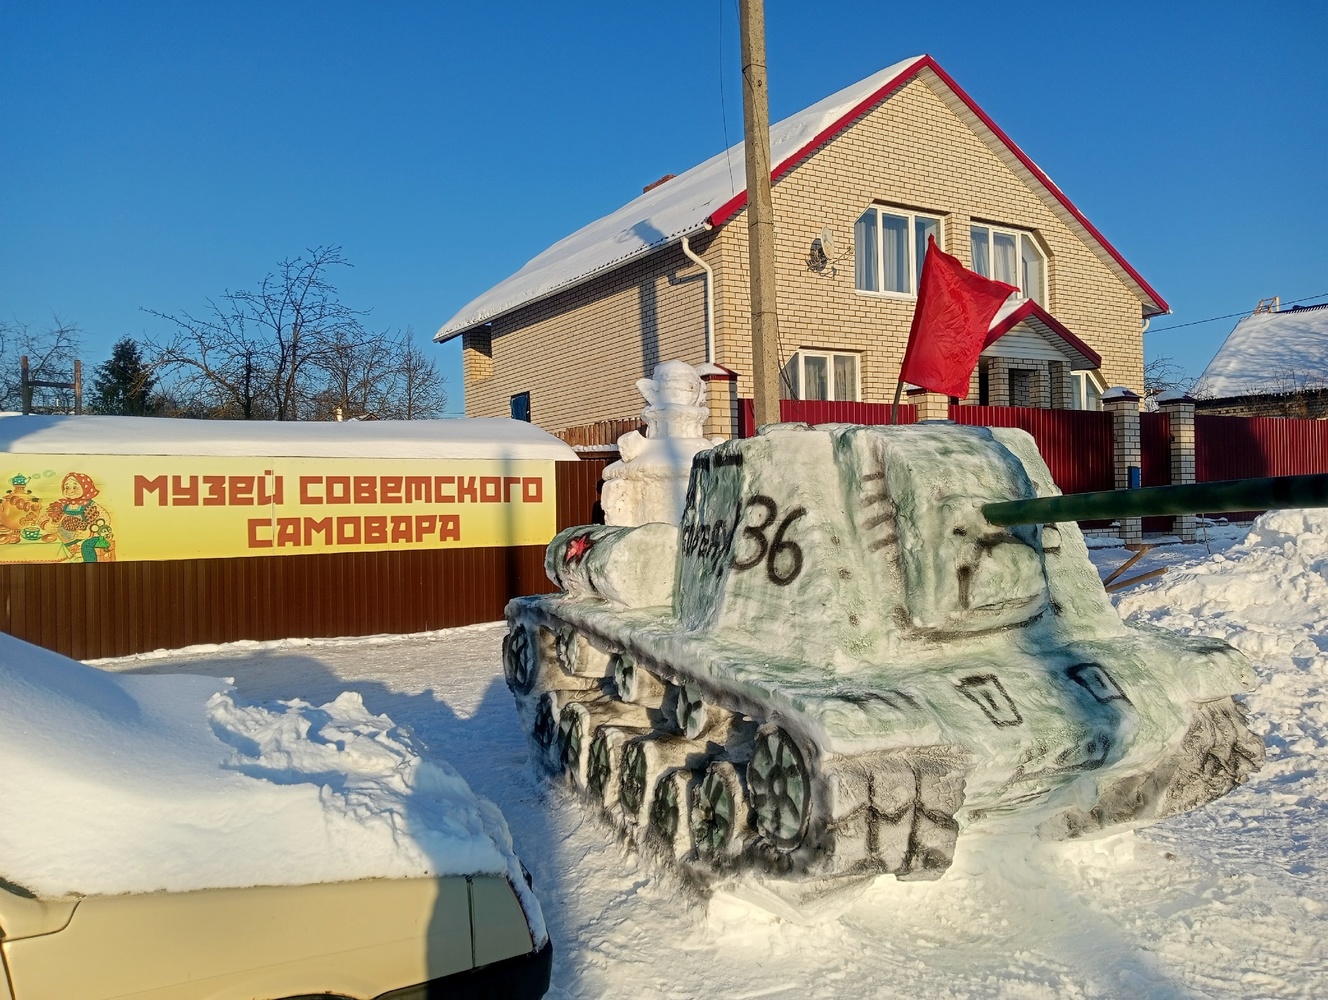 The “Battle of the Snow Tanks” ended in Kokhma on February 23